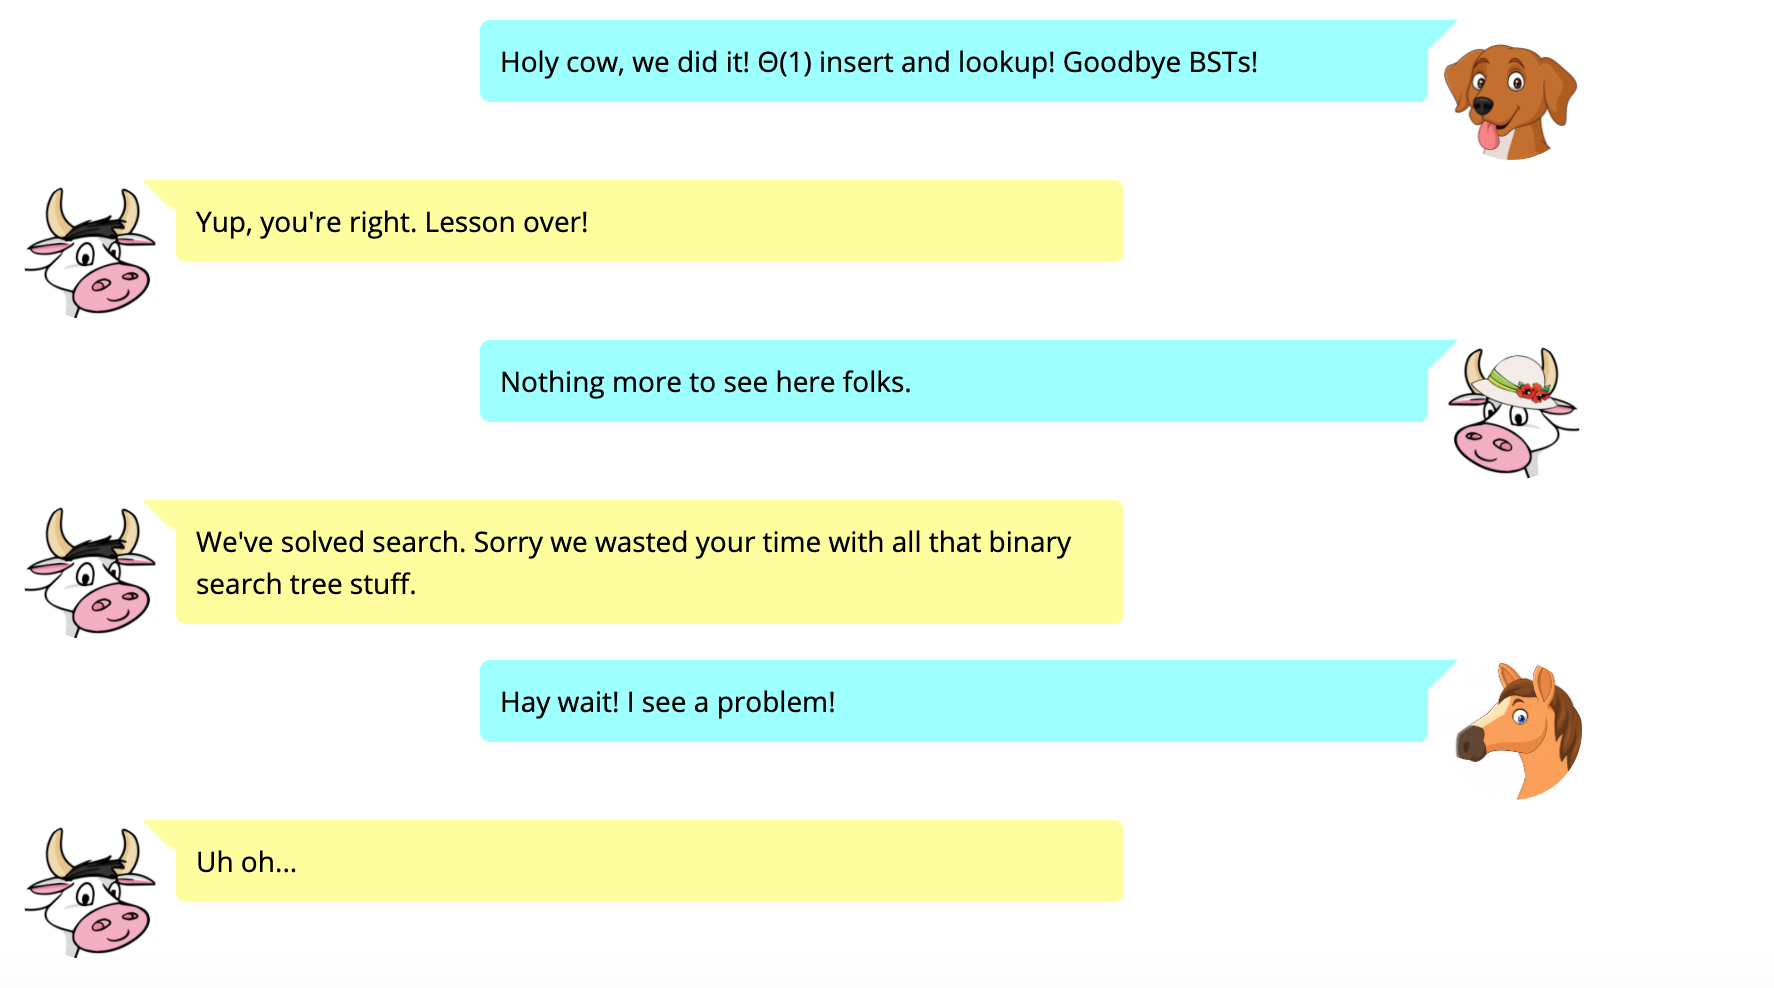 Word bubble exchanges between dog, cow, and horse avatars